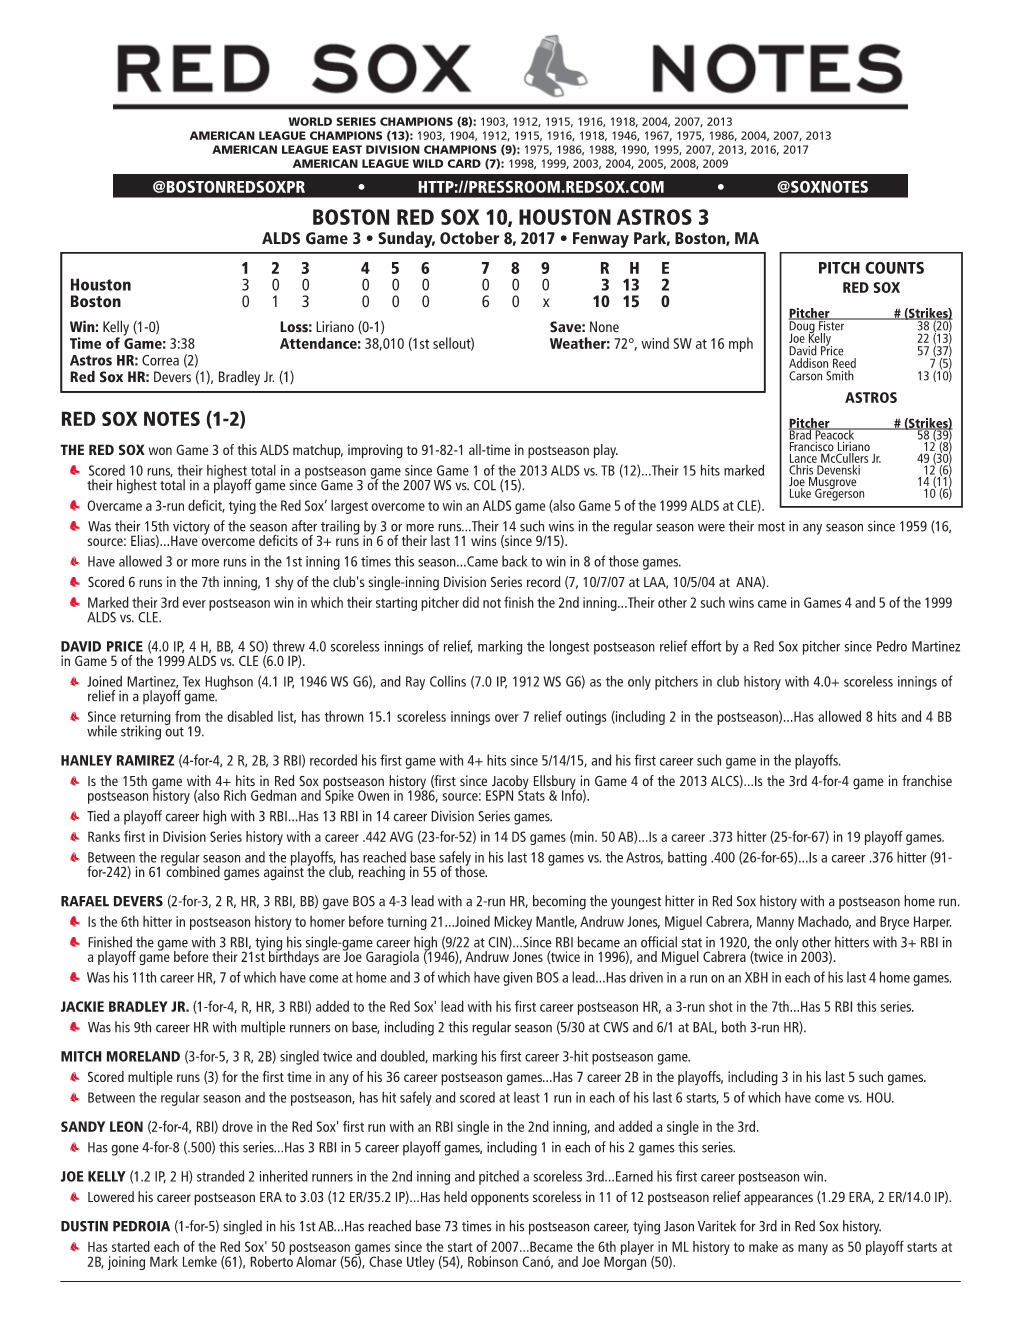 Post-Game Notes 1008 Vs. HOU.Indd